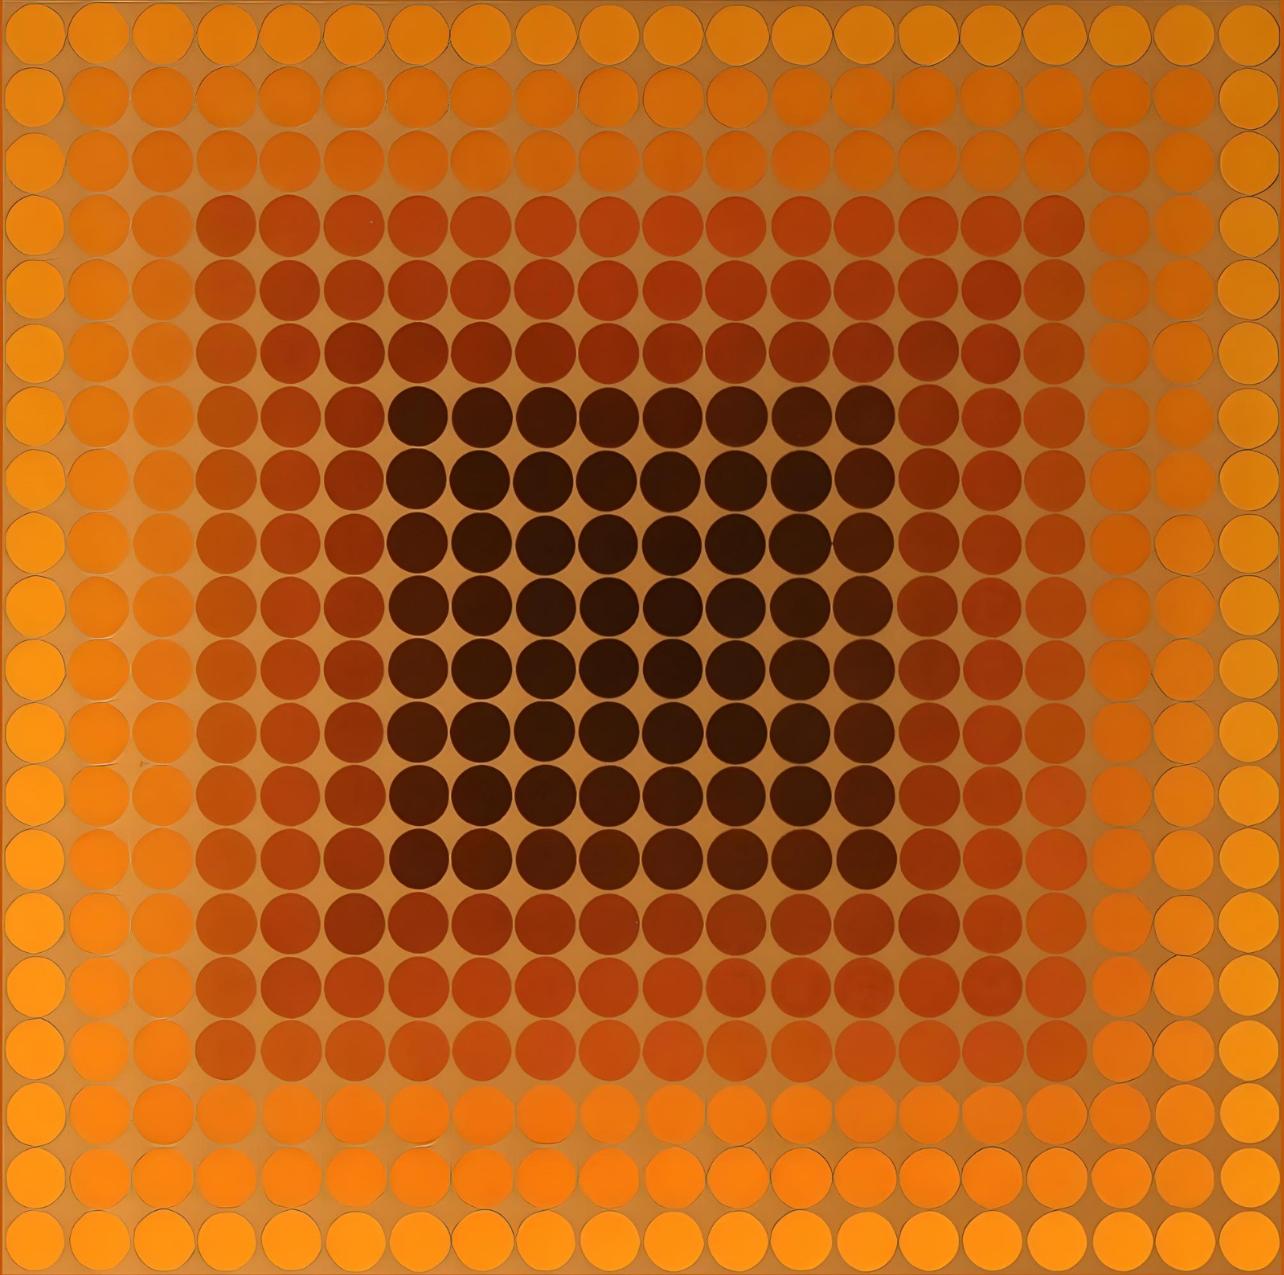 Vasarely, Composition, CTA 102 (after) - Print by Victor Vasarely